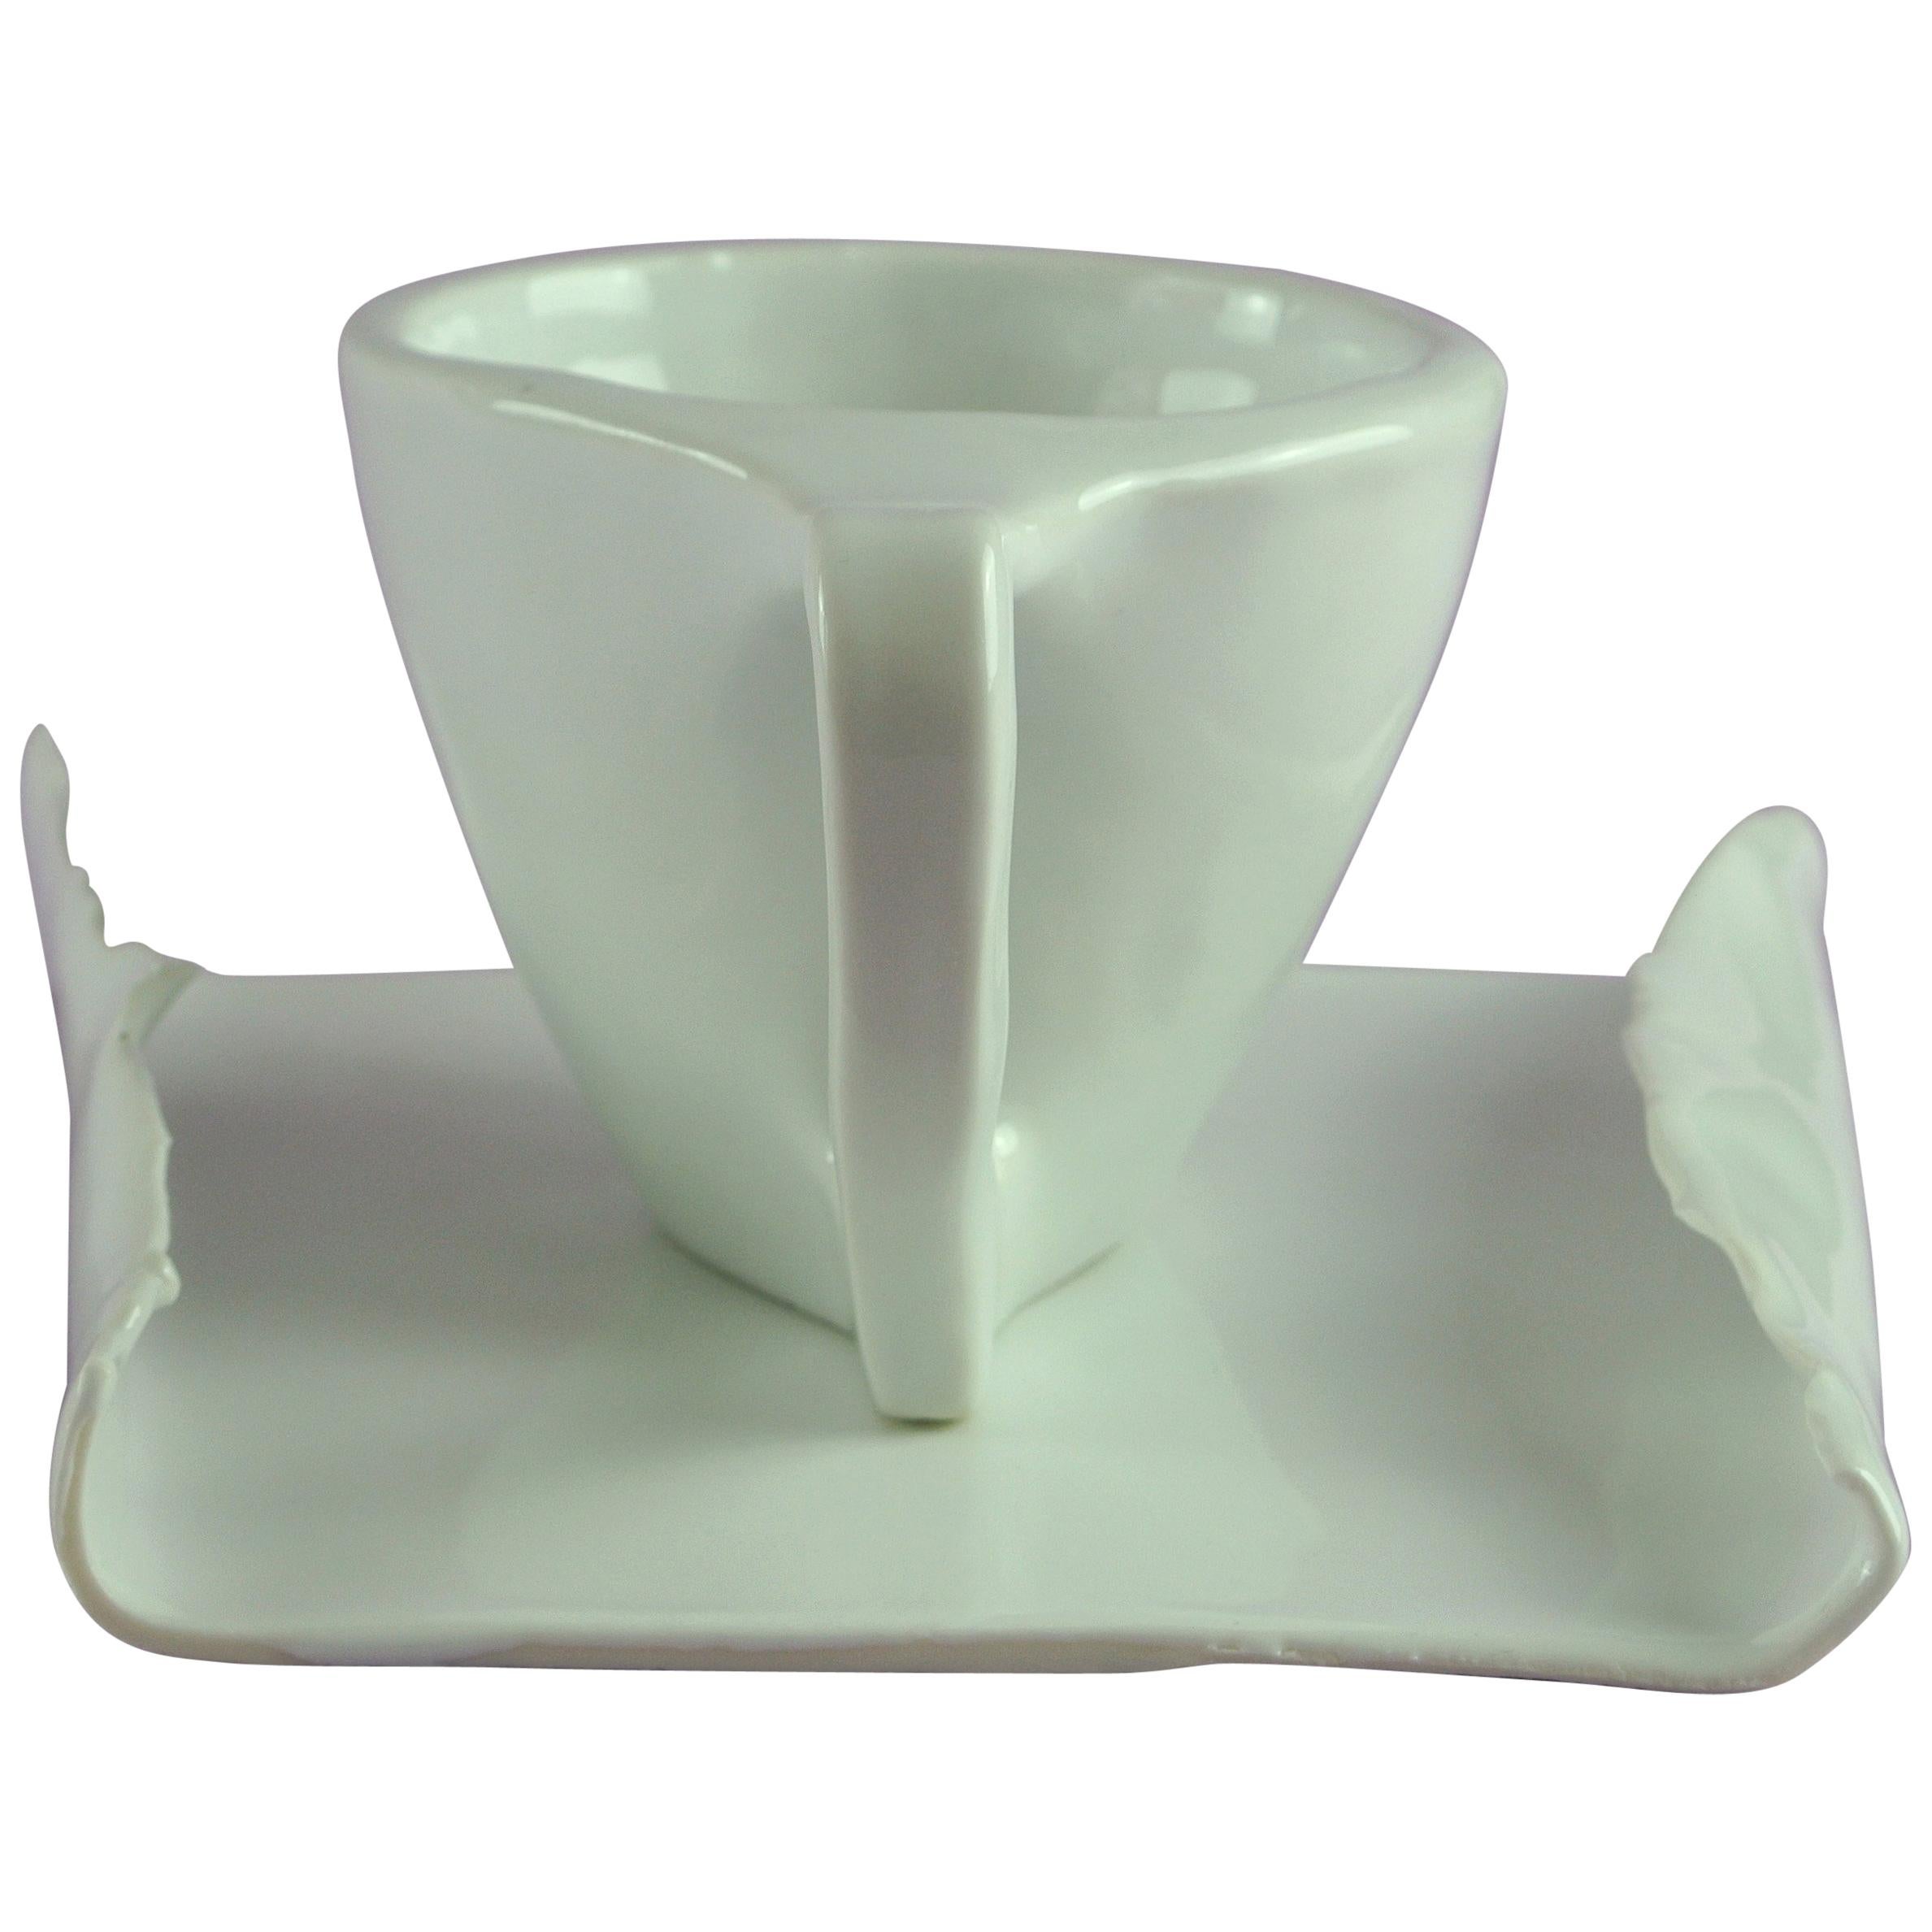 Hand Carved Porcelain Cup and Tray with White Glossy Glaze